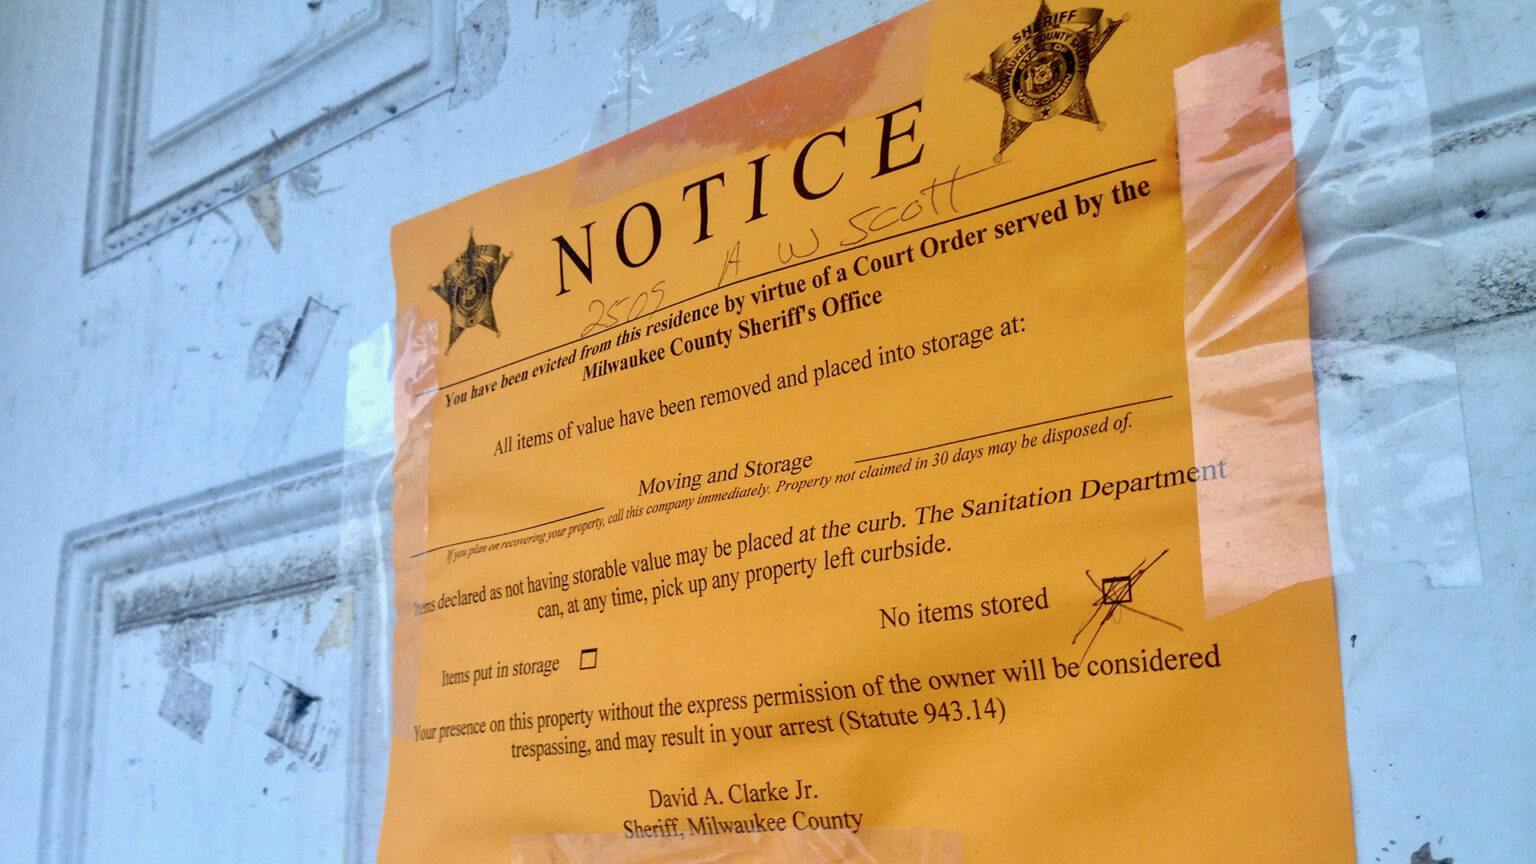 An eviction notice is posted on a door.